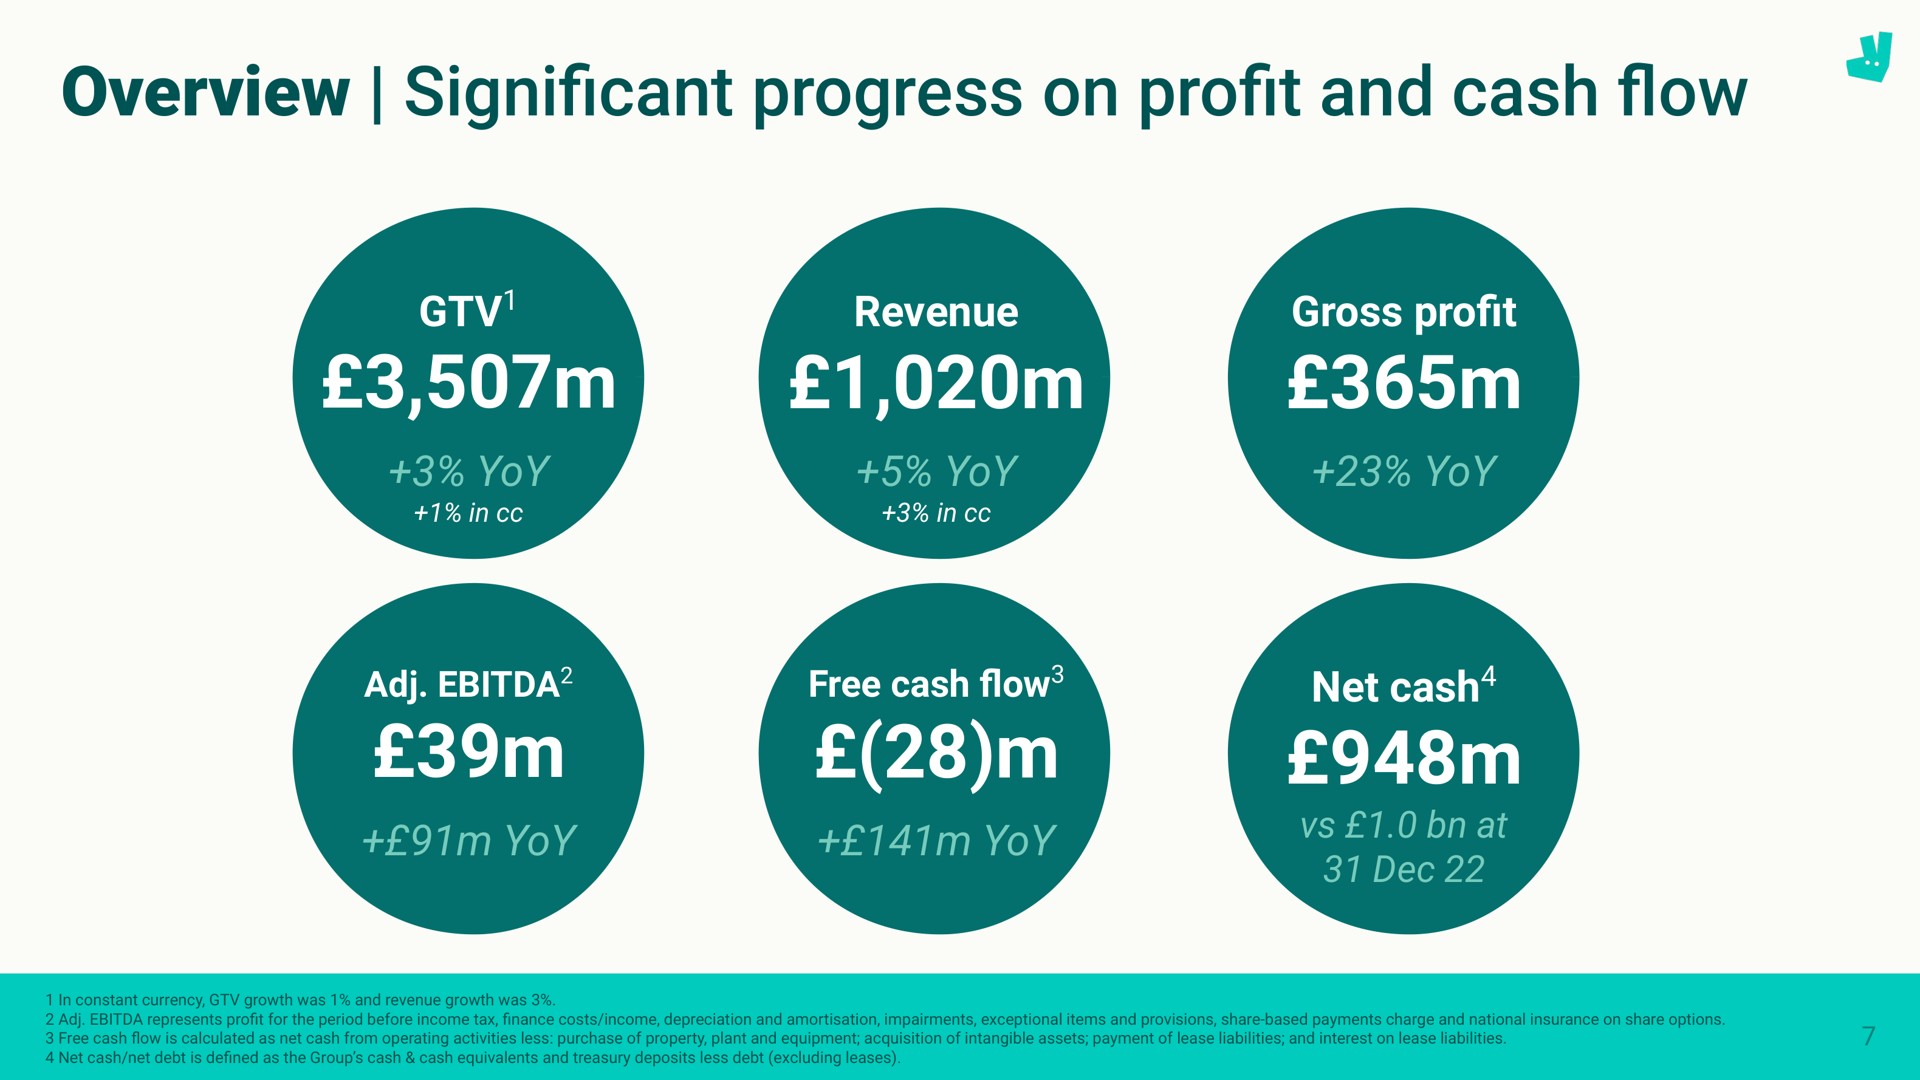 overview cant progress on pro and cash significant profit flow a me | Deliveroo